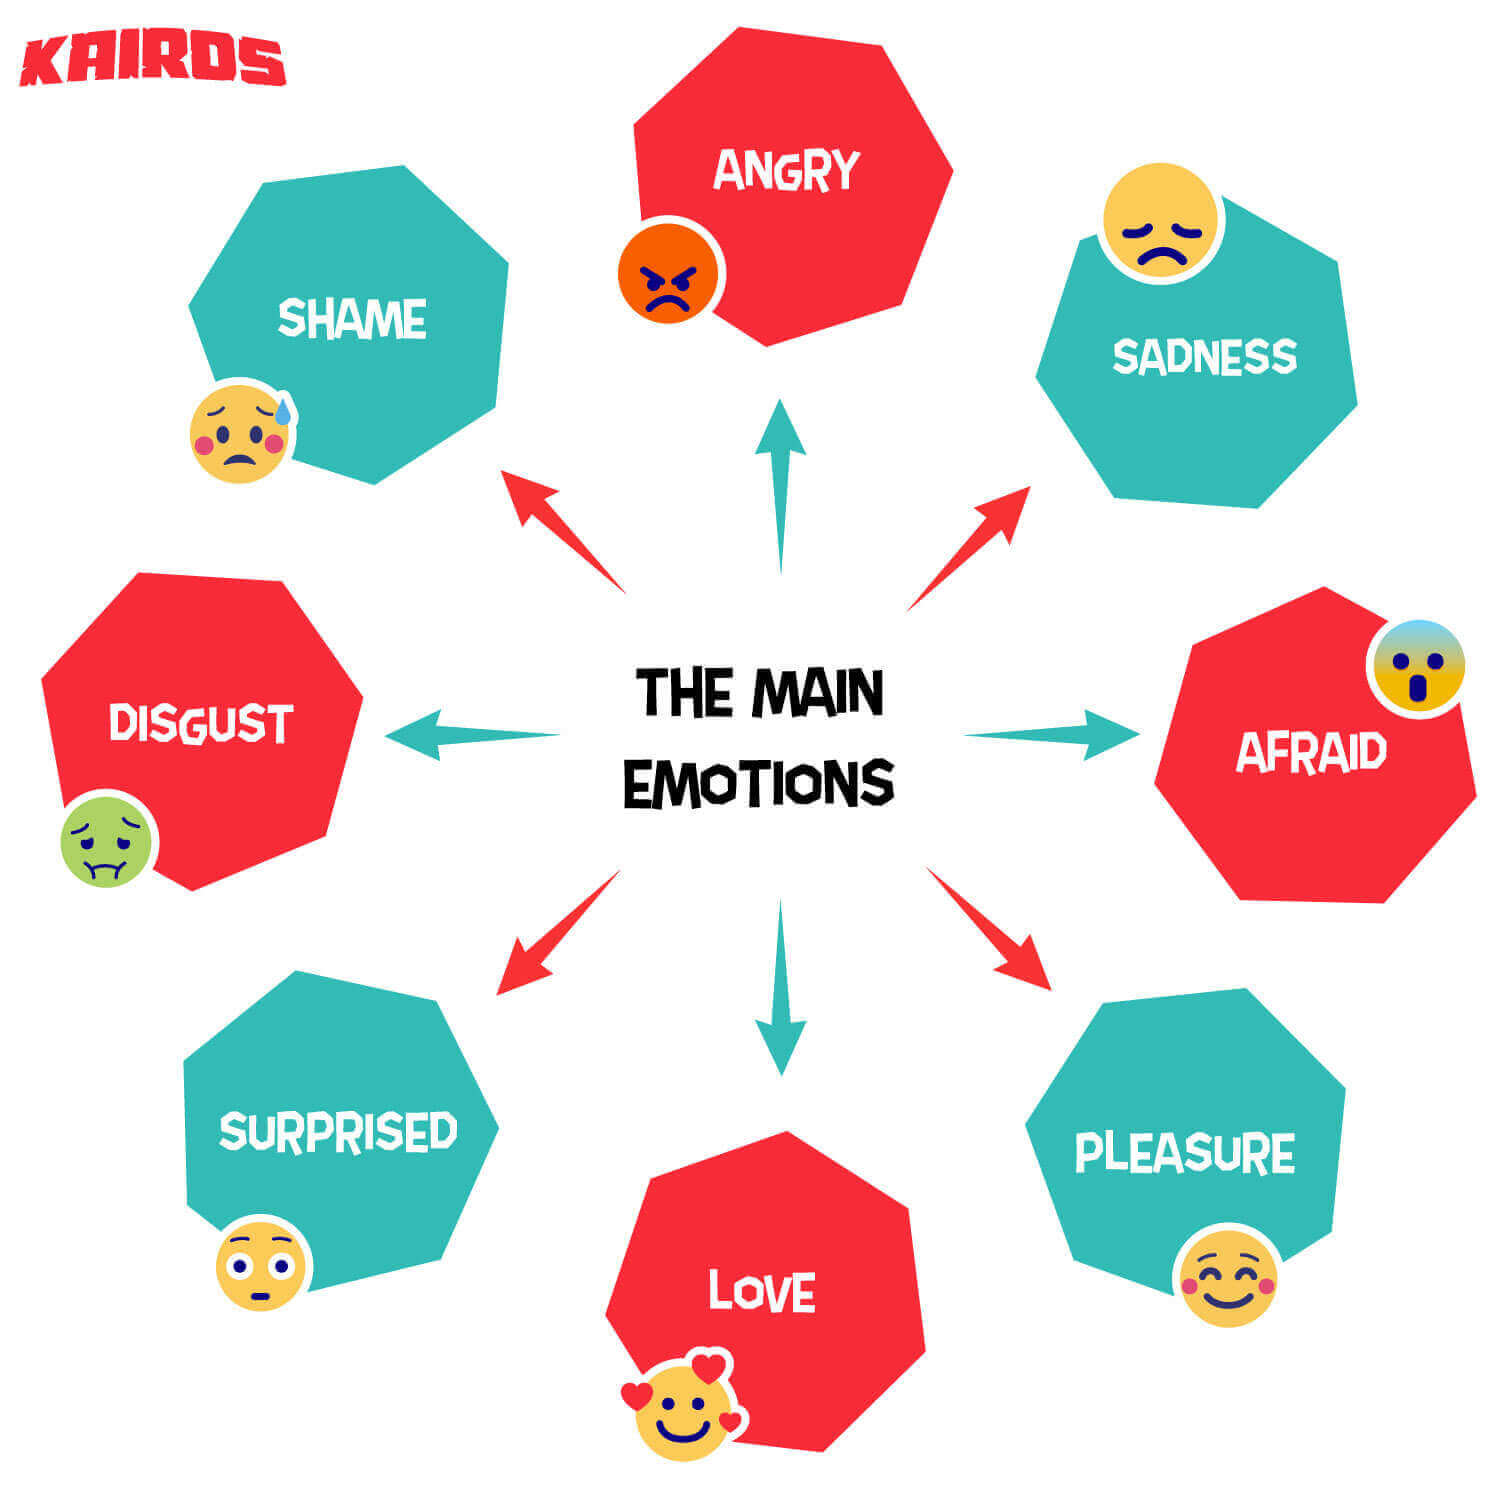 The 8 main emotions